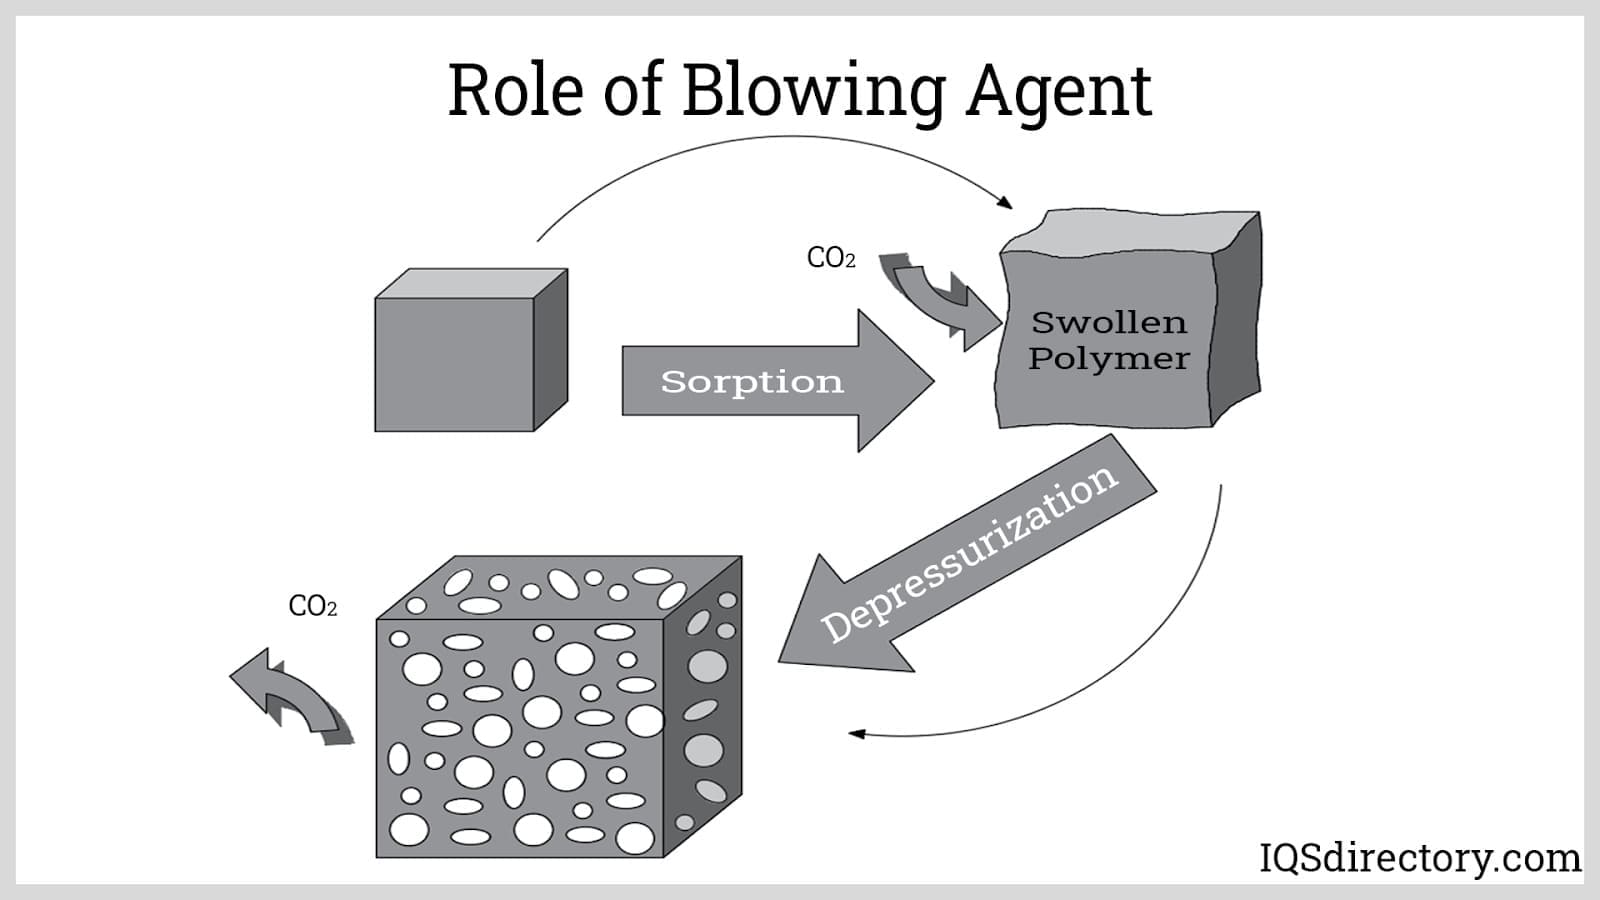 Role of Blowing Agent